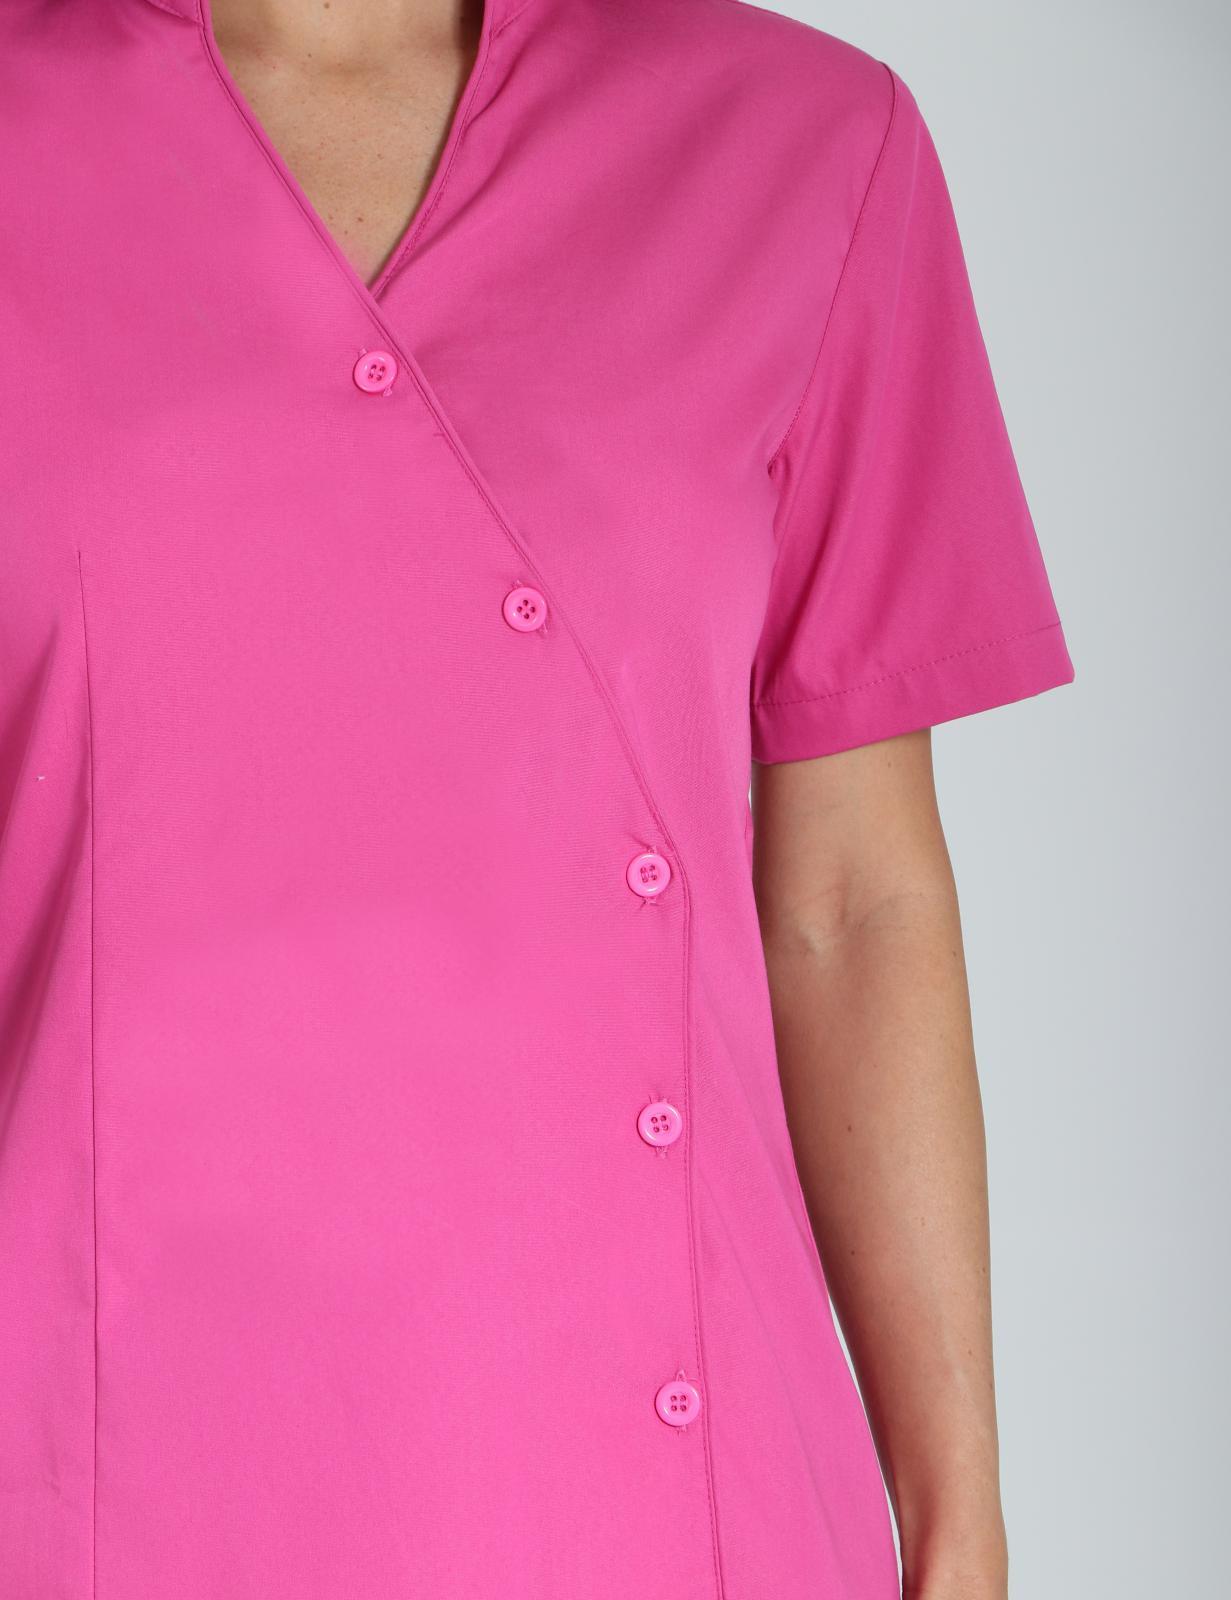 Jessie Style Tunic Top - Pink - 3X Large - 0